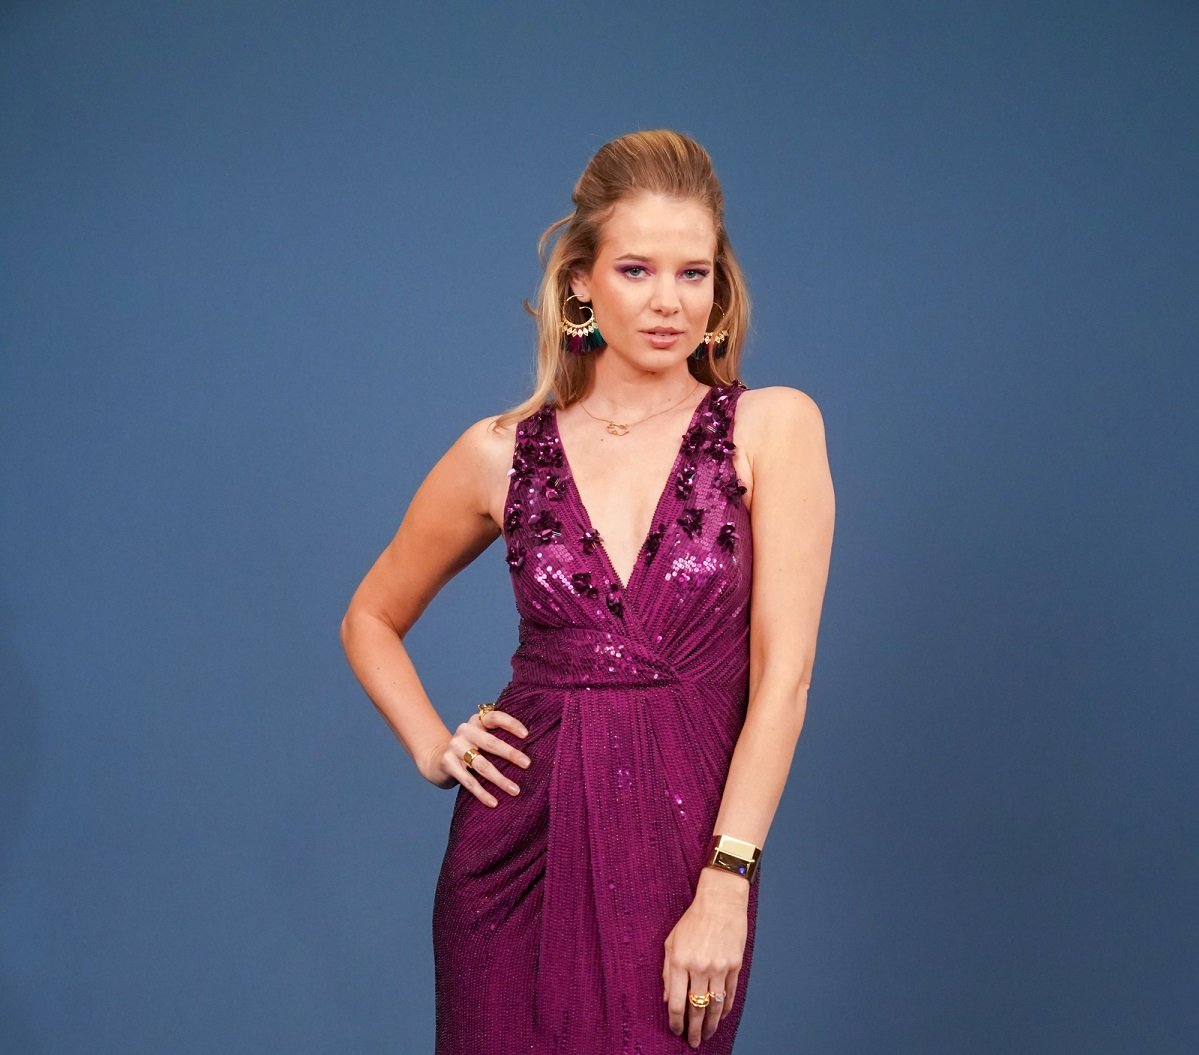 'The Young and the Restless' star Allison Lanier in a purple dress and posing in front of a blue backdrop.